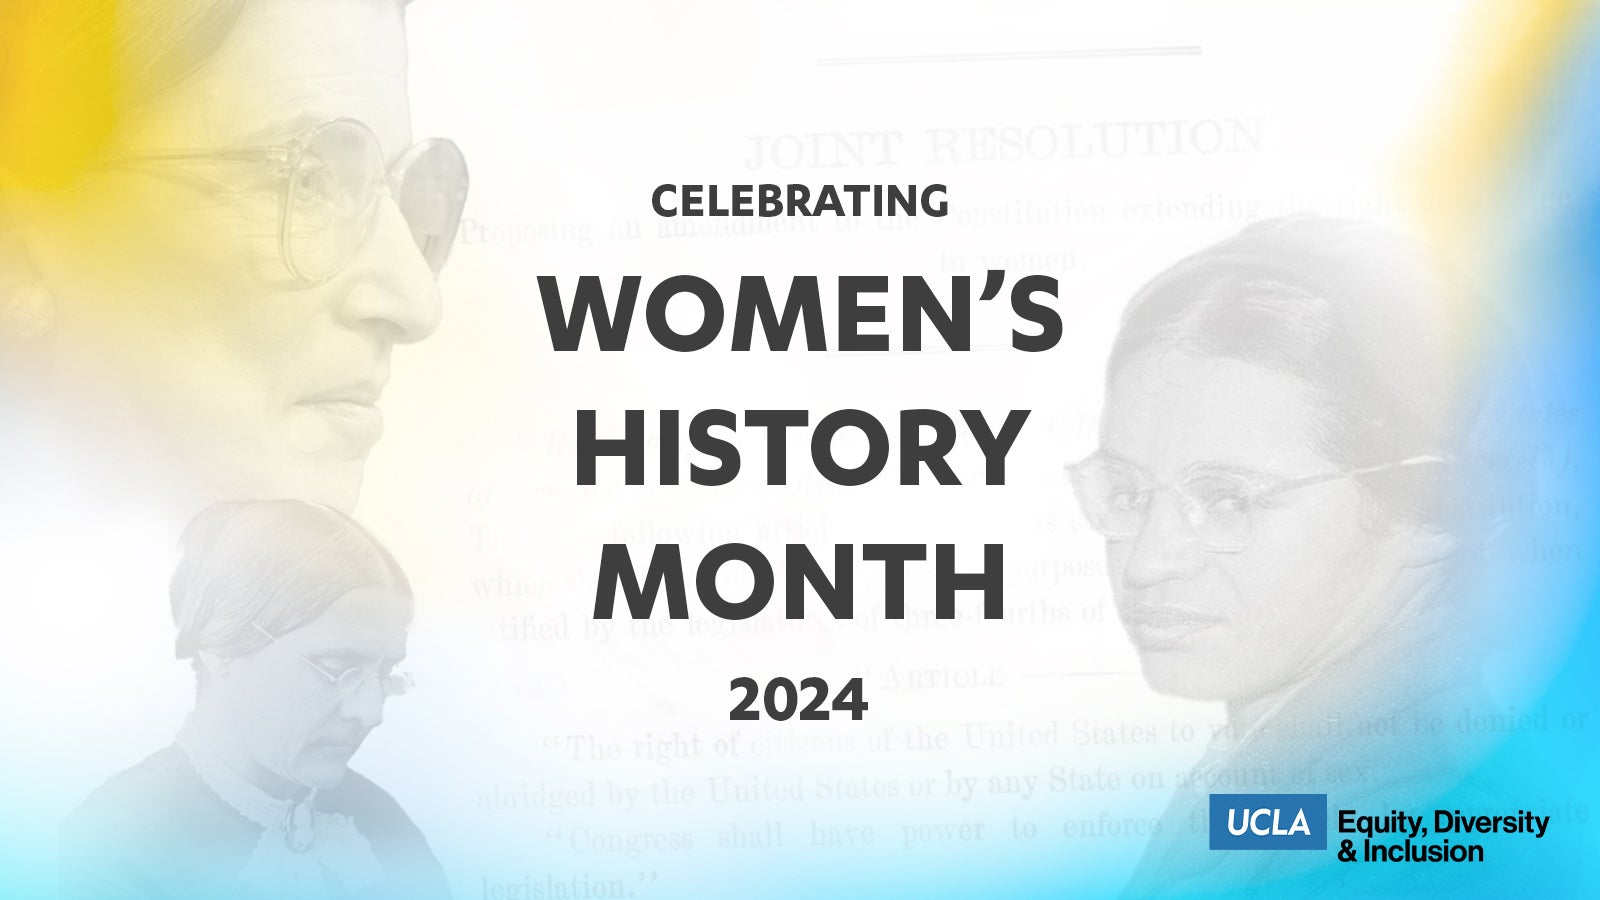 graphic celebrating women's history month (march 2024), featuring photos of rosa parks, ruth bader ginsburg, and susan b. anthony